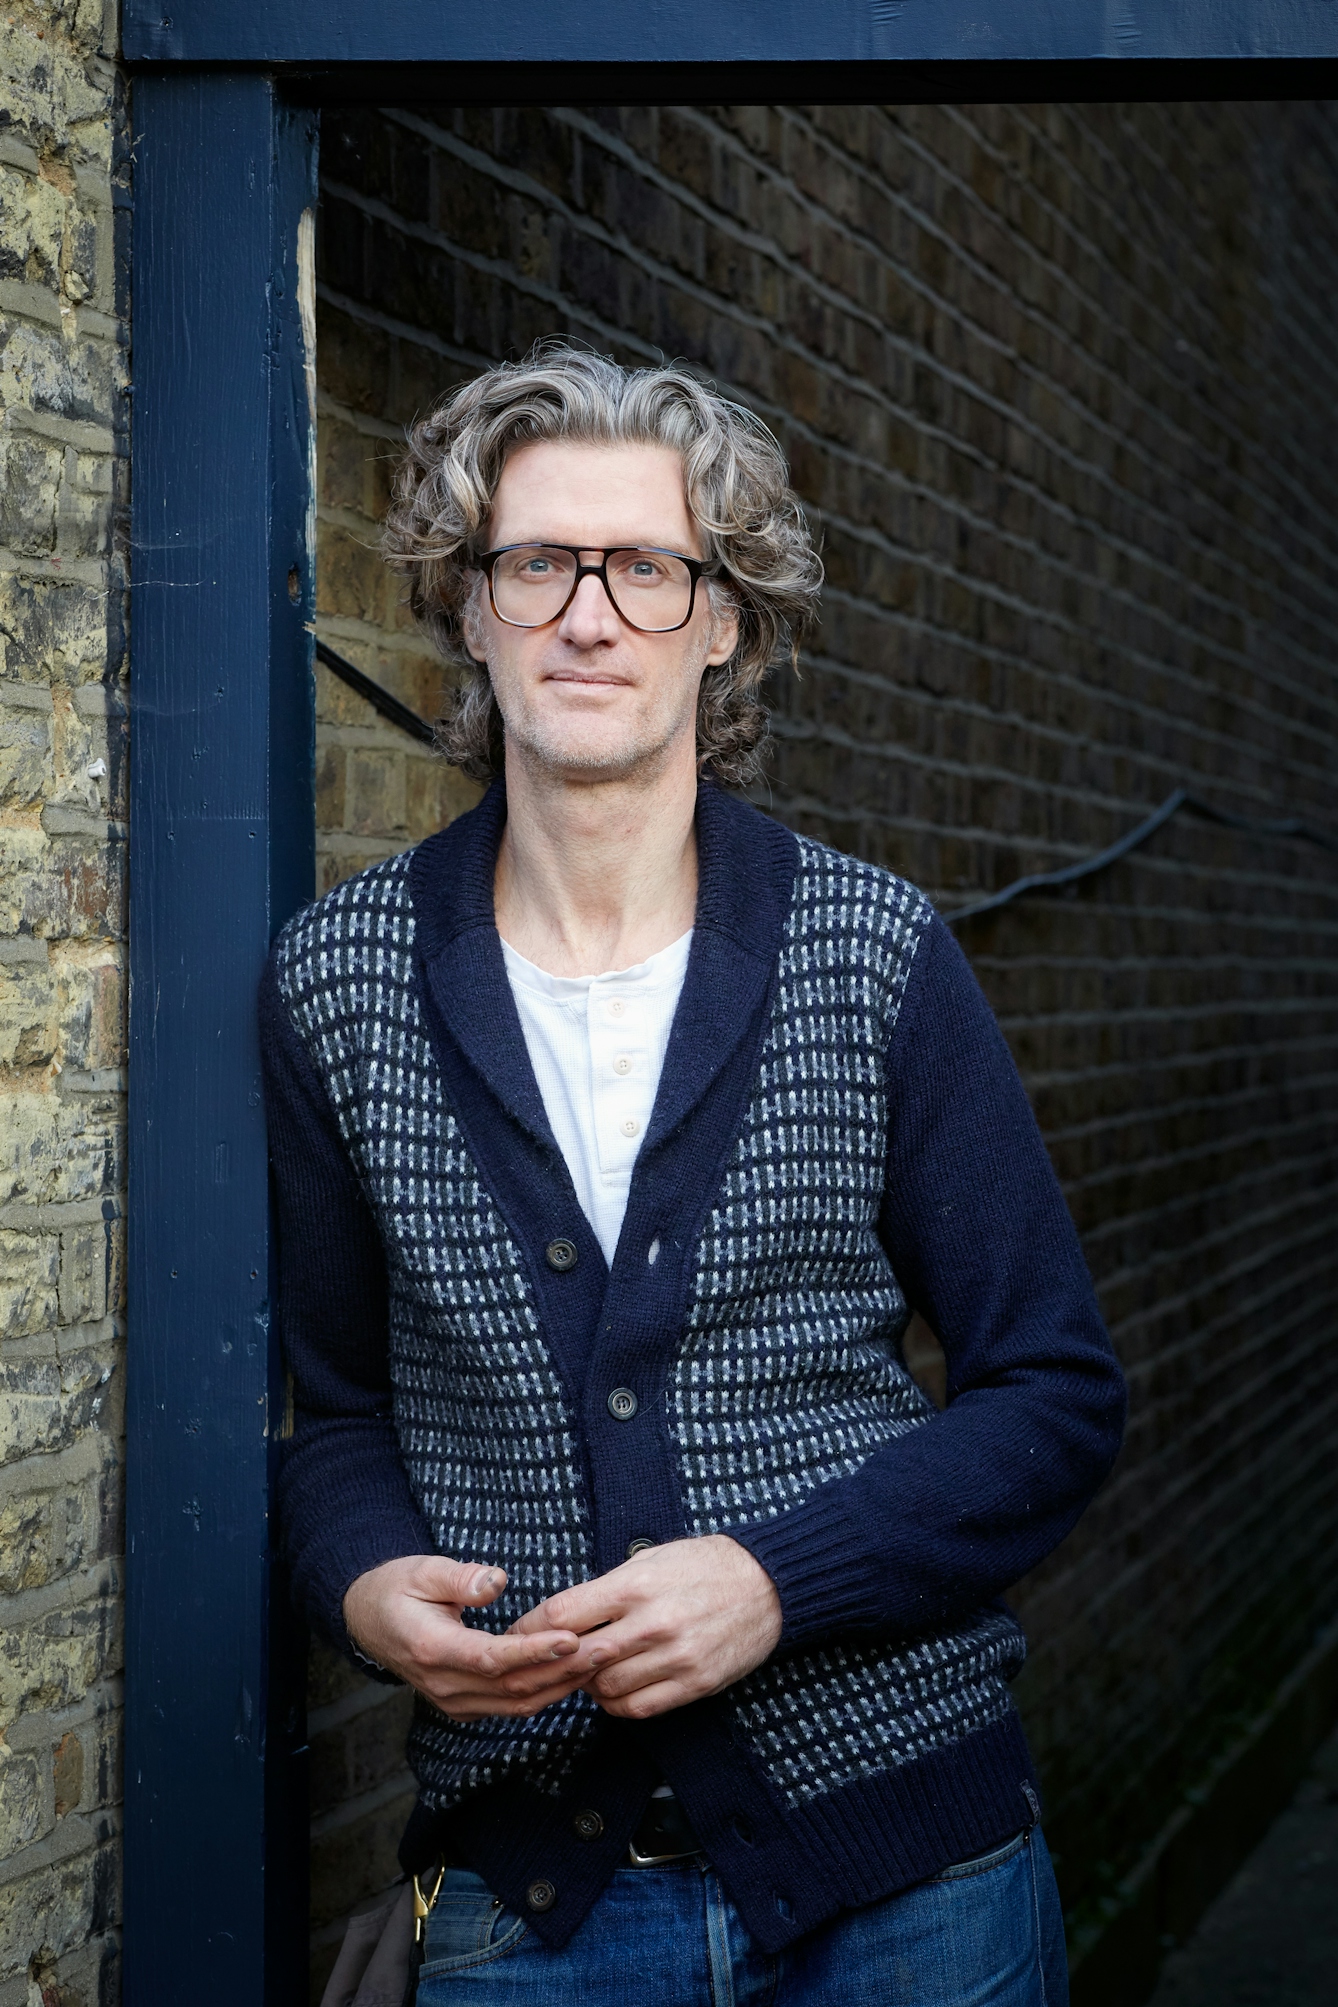 Photograph of a man wearing a patterned cardigan leaning against a blue doorframe attached to a brick wall. He is looking to camera and is wearing a large pair of thin rimmed spectacles. He has flowing wavy hair.